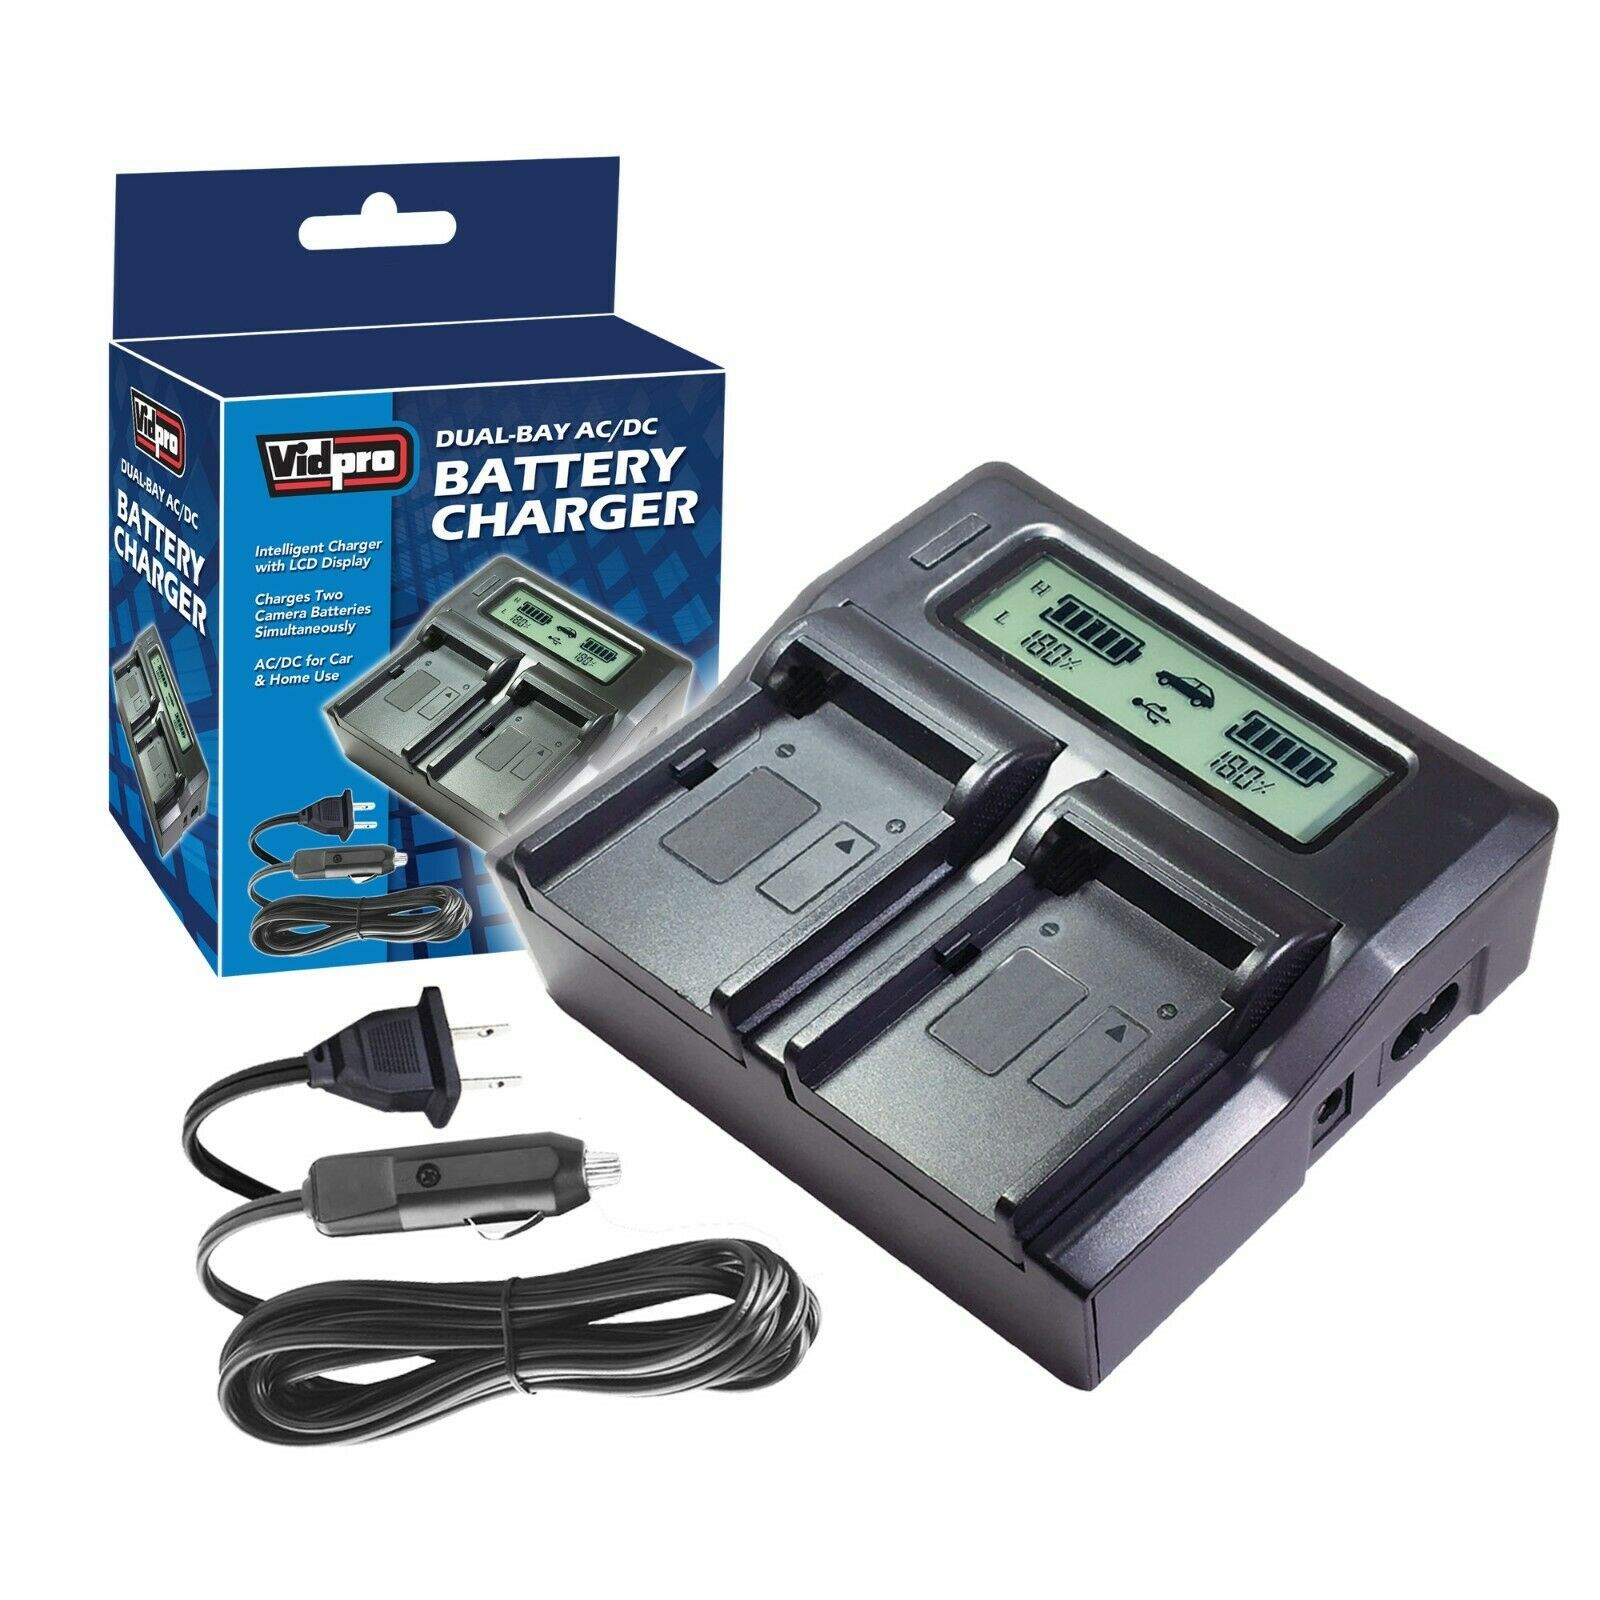 CG-A10, CG-A20, 0872C002, 2416C002, Battery Charger for Canon BP-A30, BP-A60, - $44.09